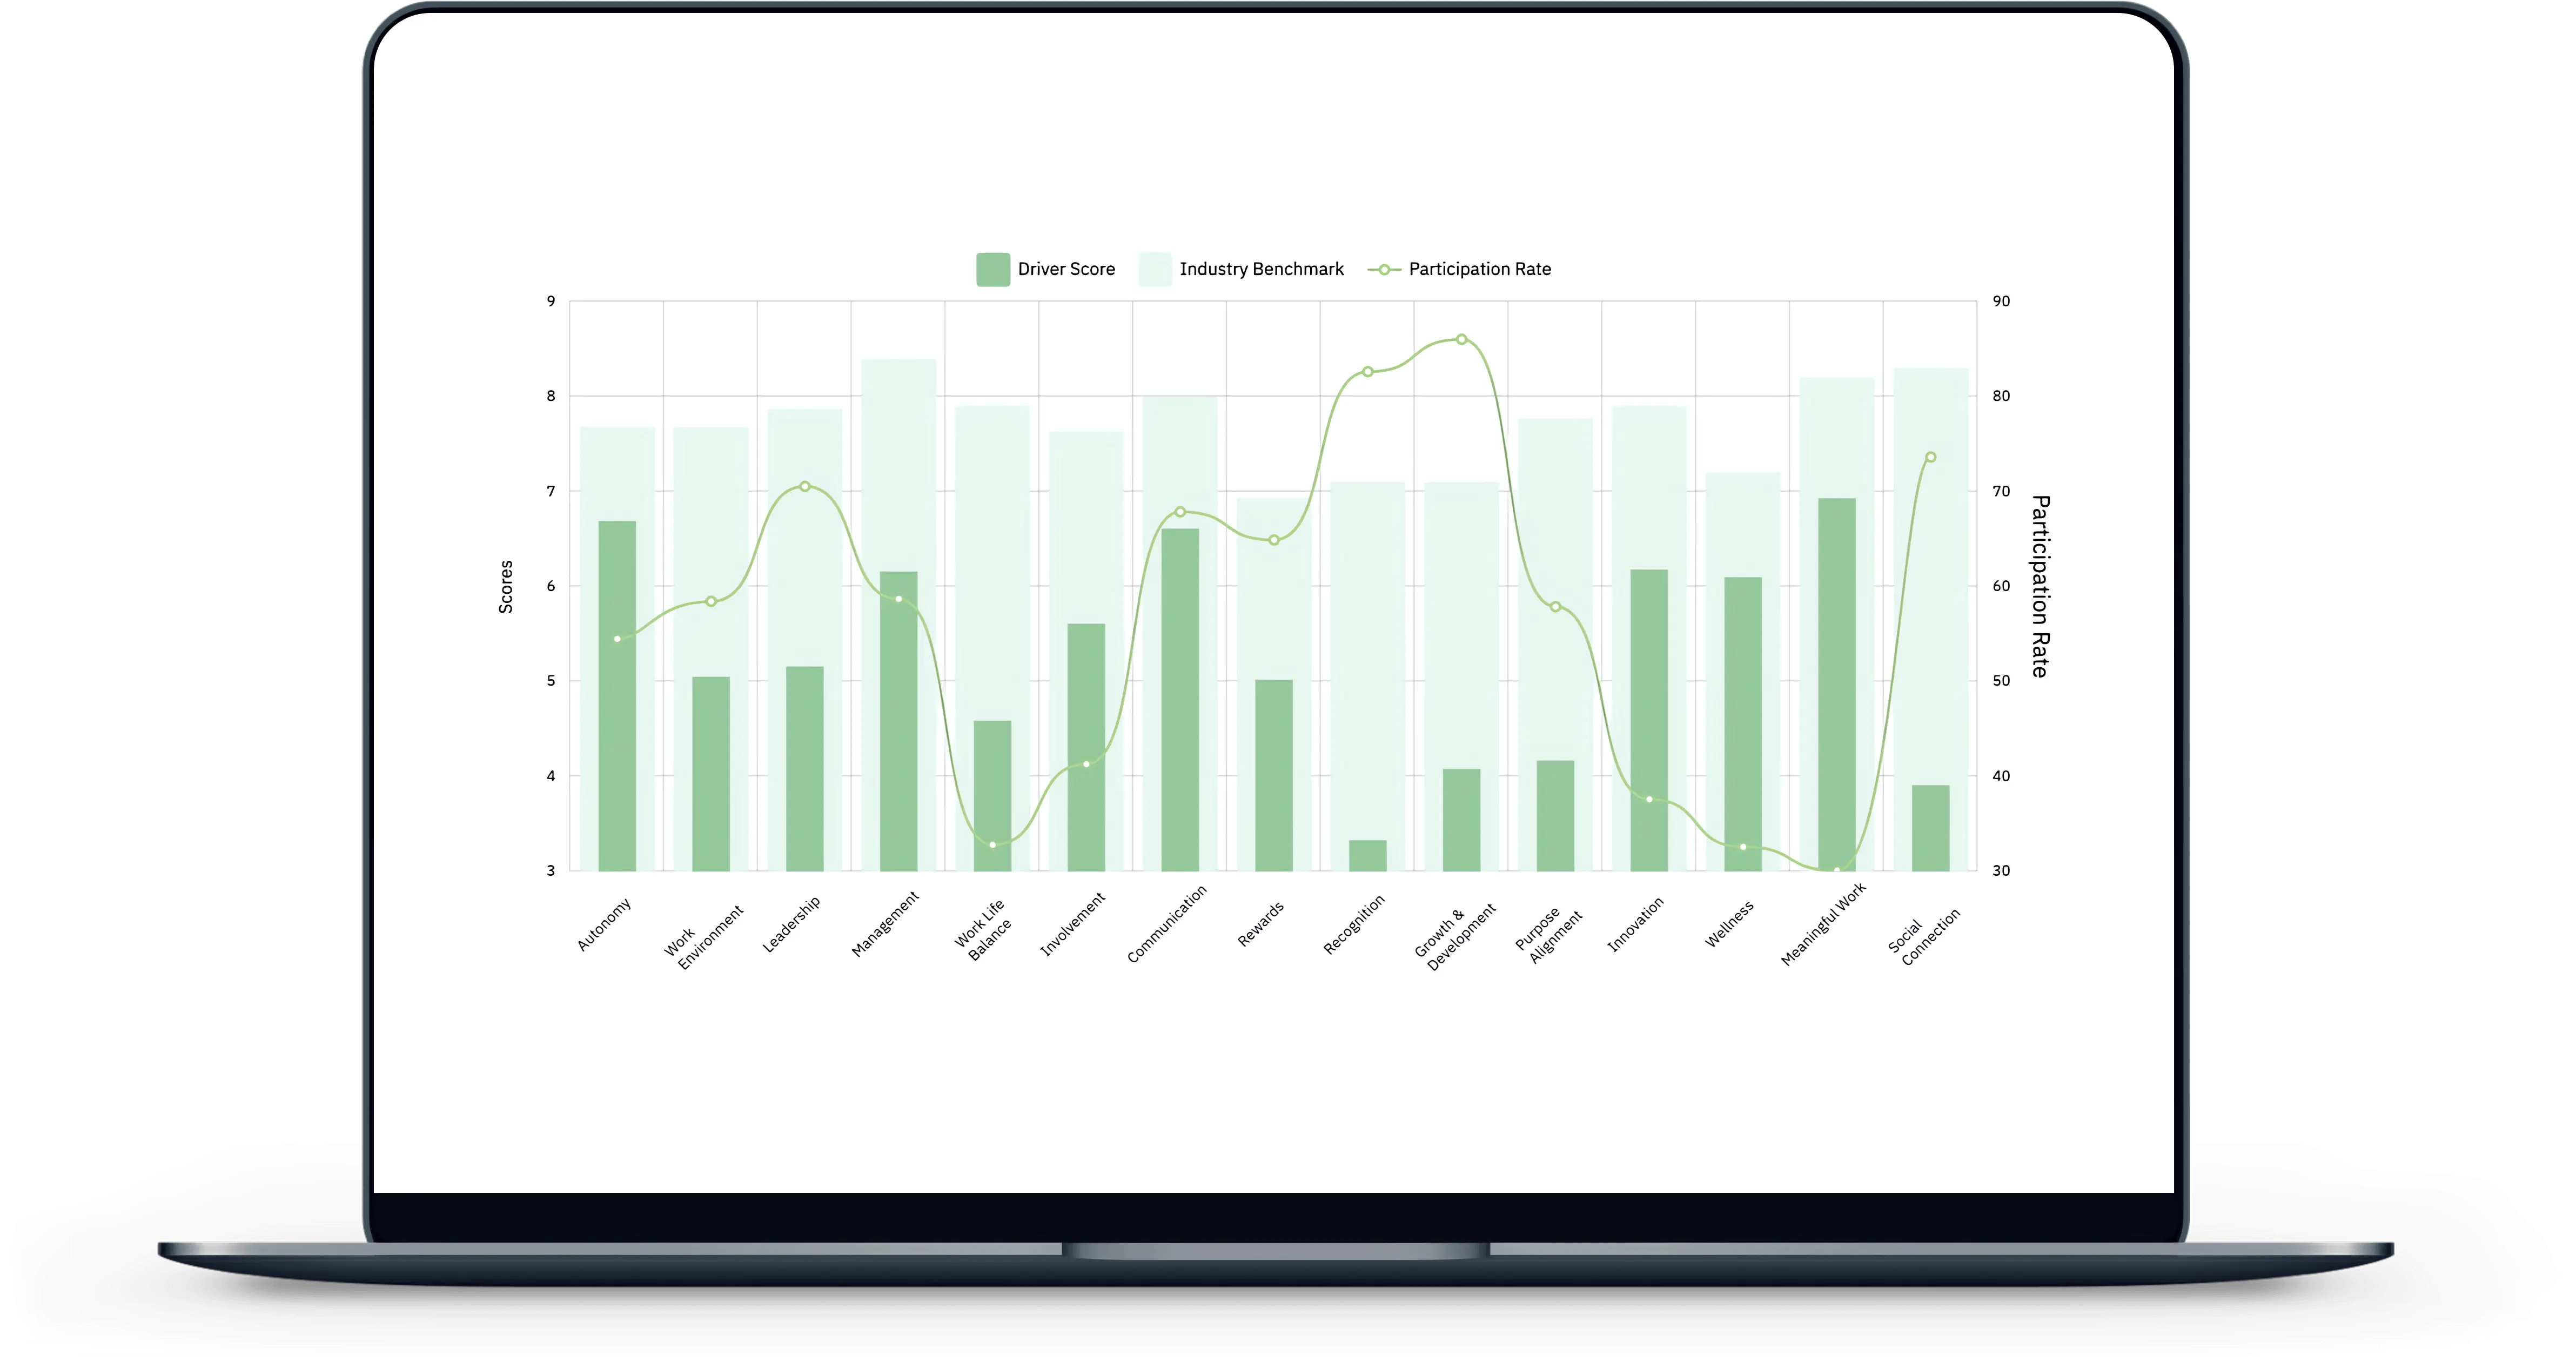 Employee engagement driver score benchmark analysis with our best in class Employee Engagement Platform